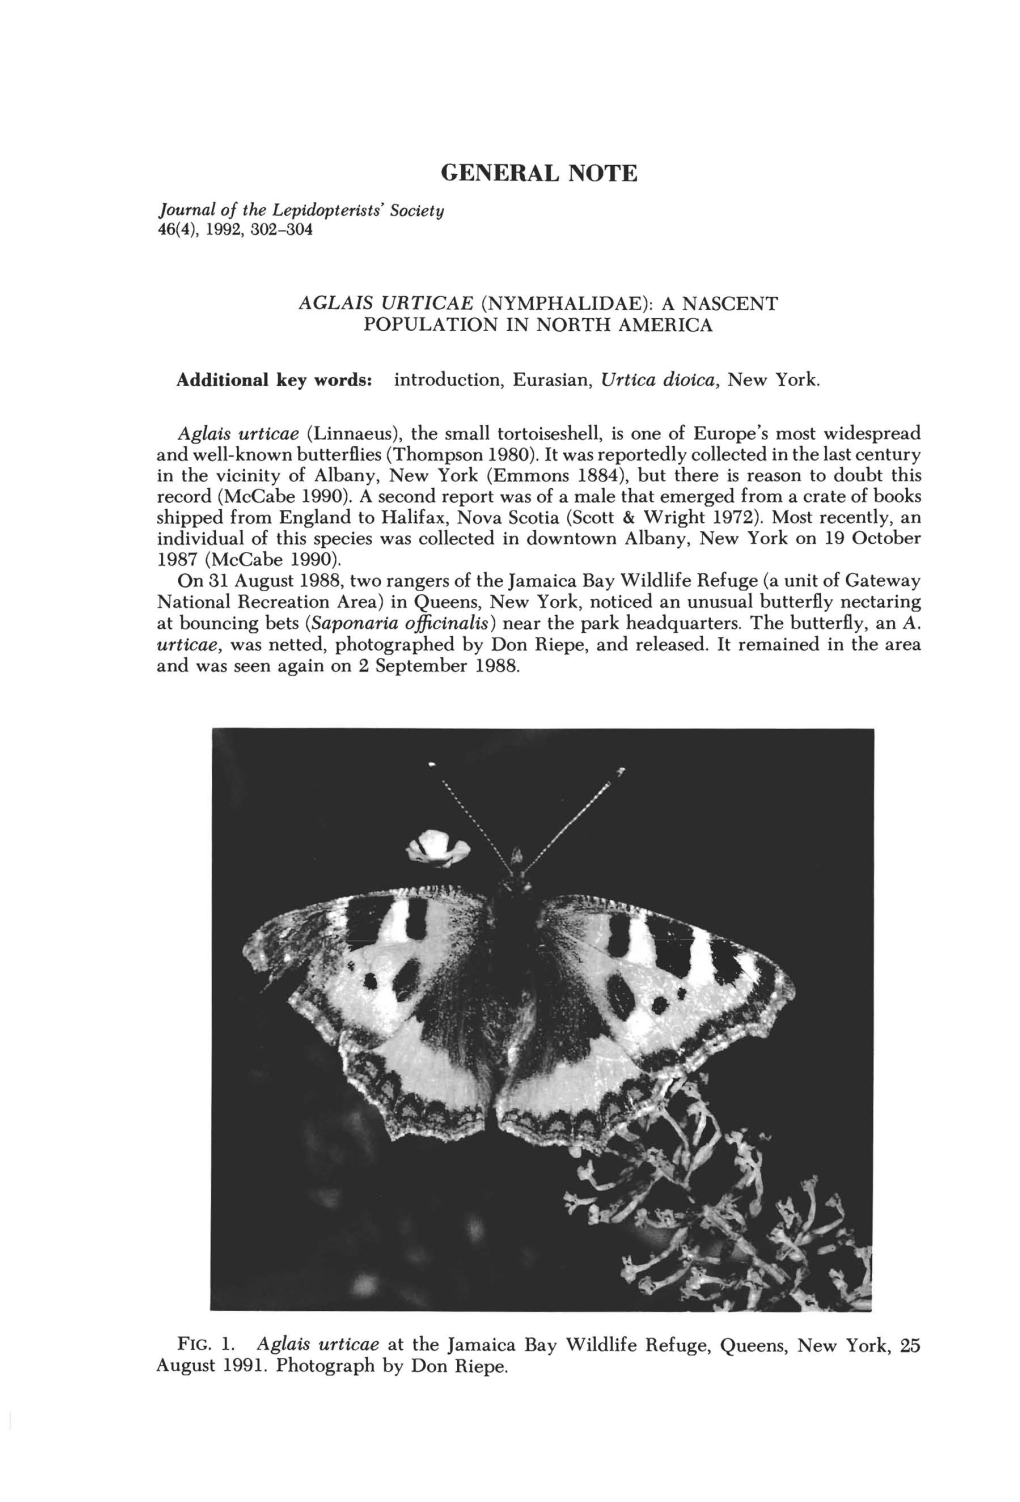 Aglais Urticae (Nymphalidae): a Nascent Population in North America